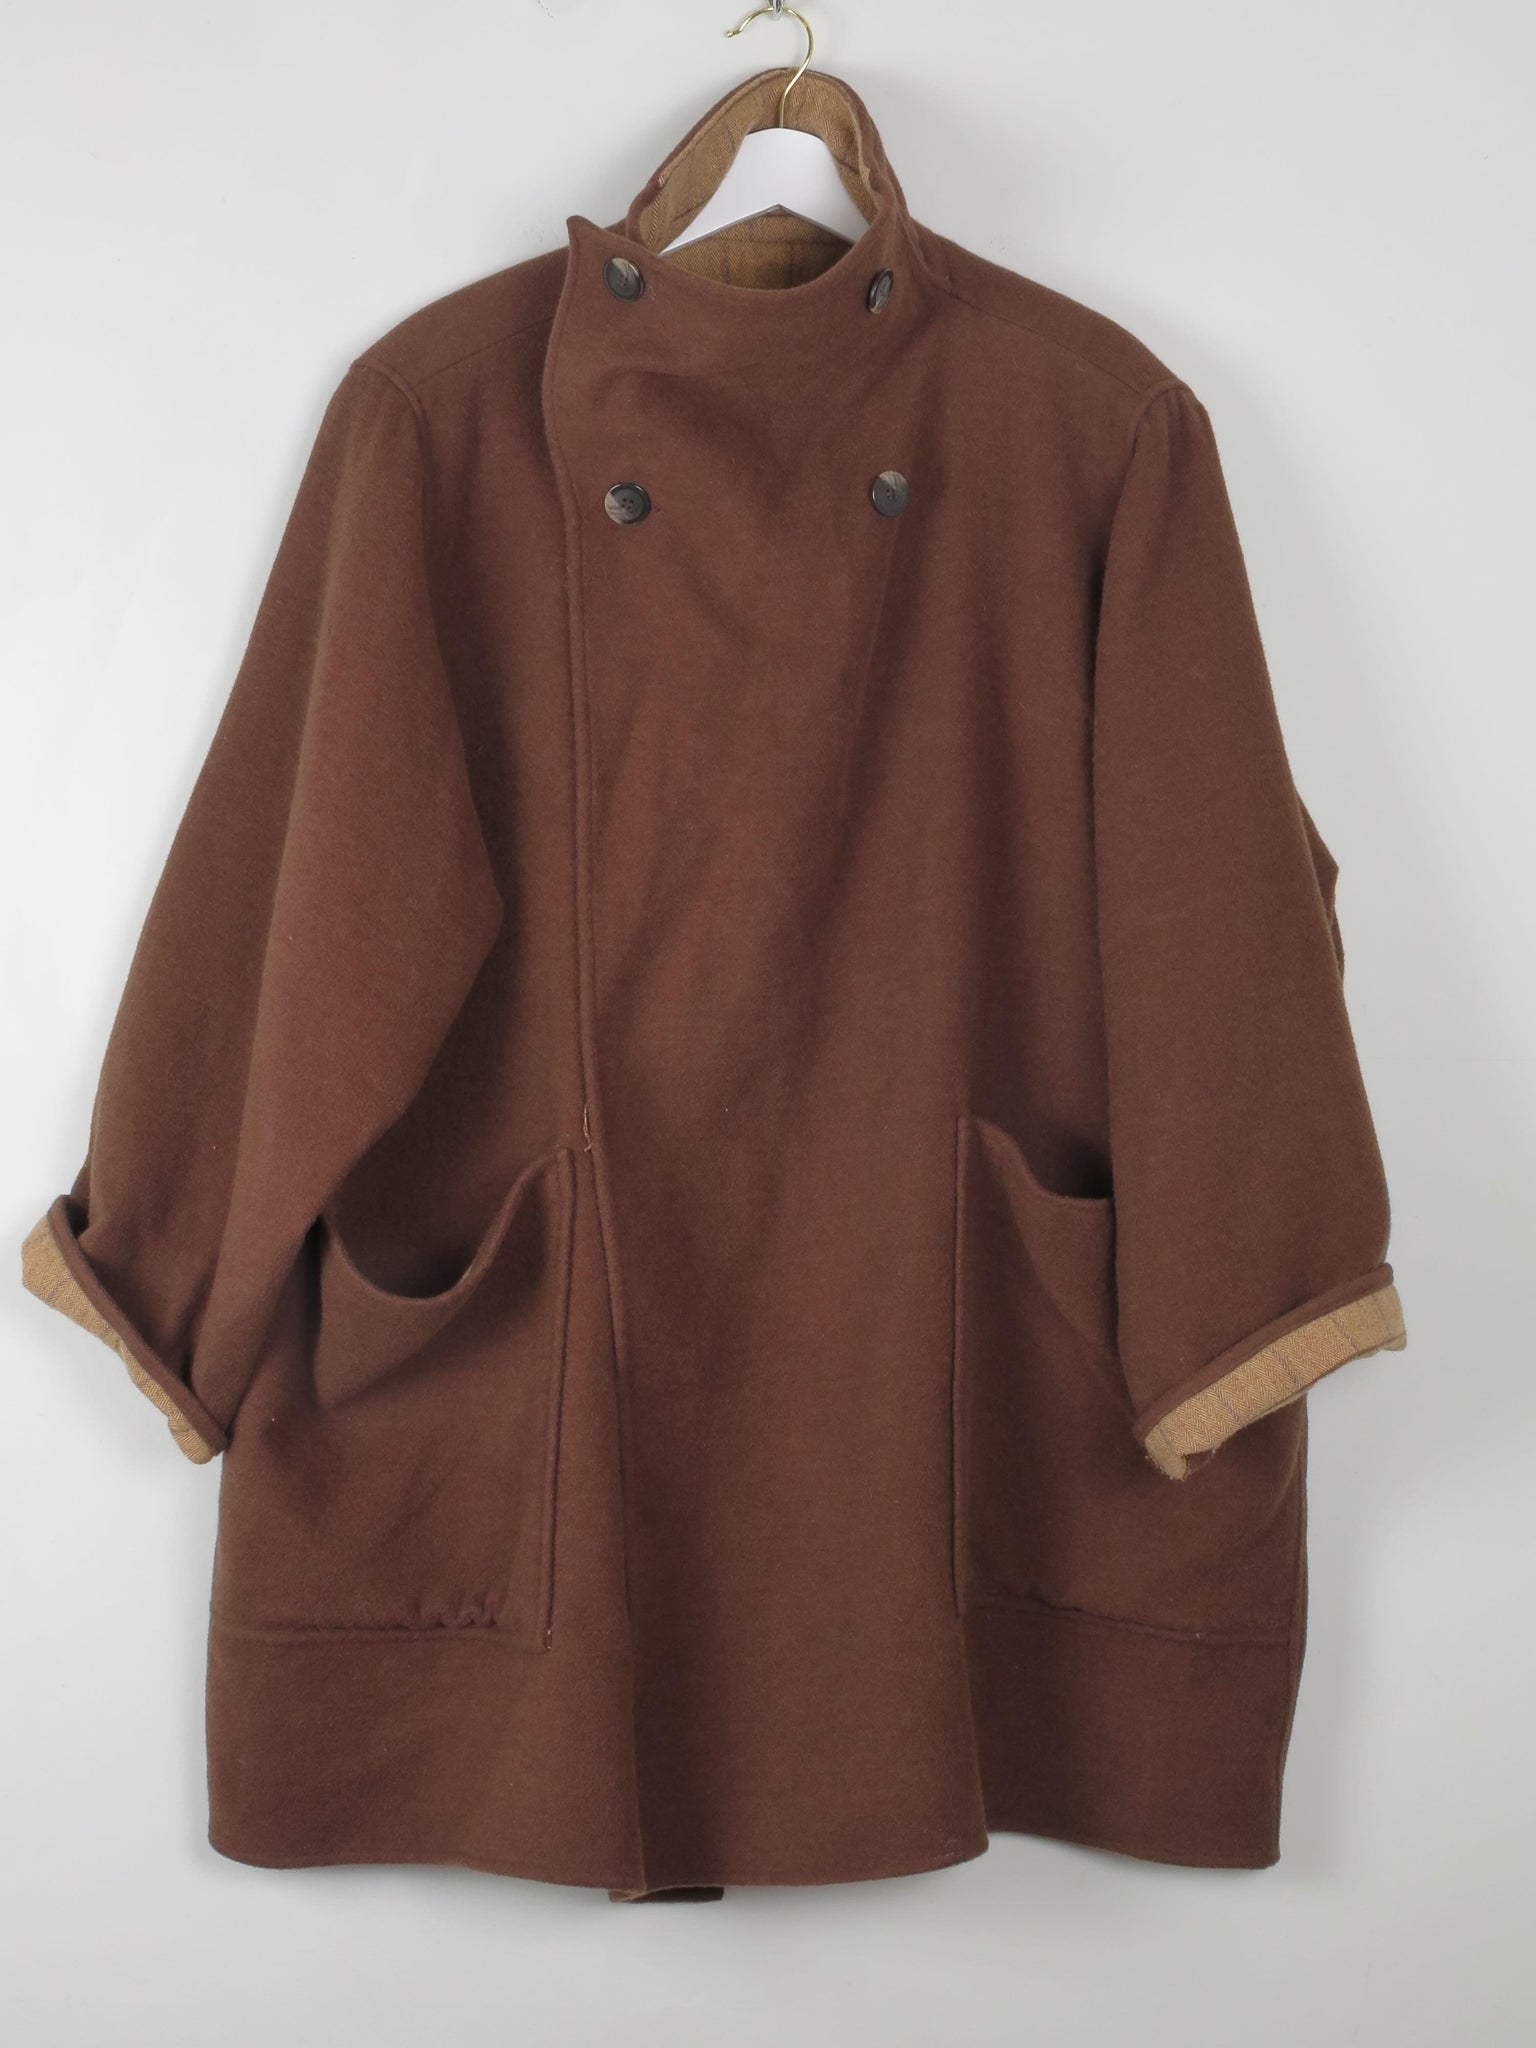 Women's Vintage Wool Coat By Hourihan L/XL - The Harlequin